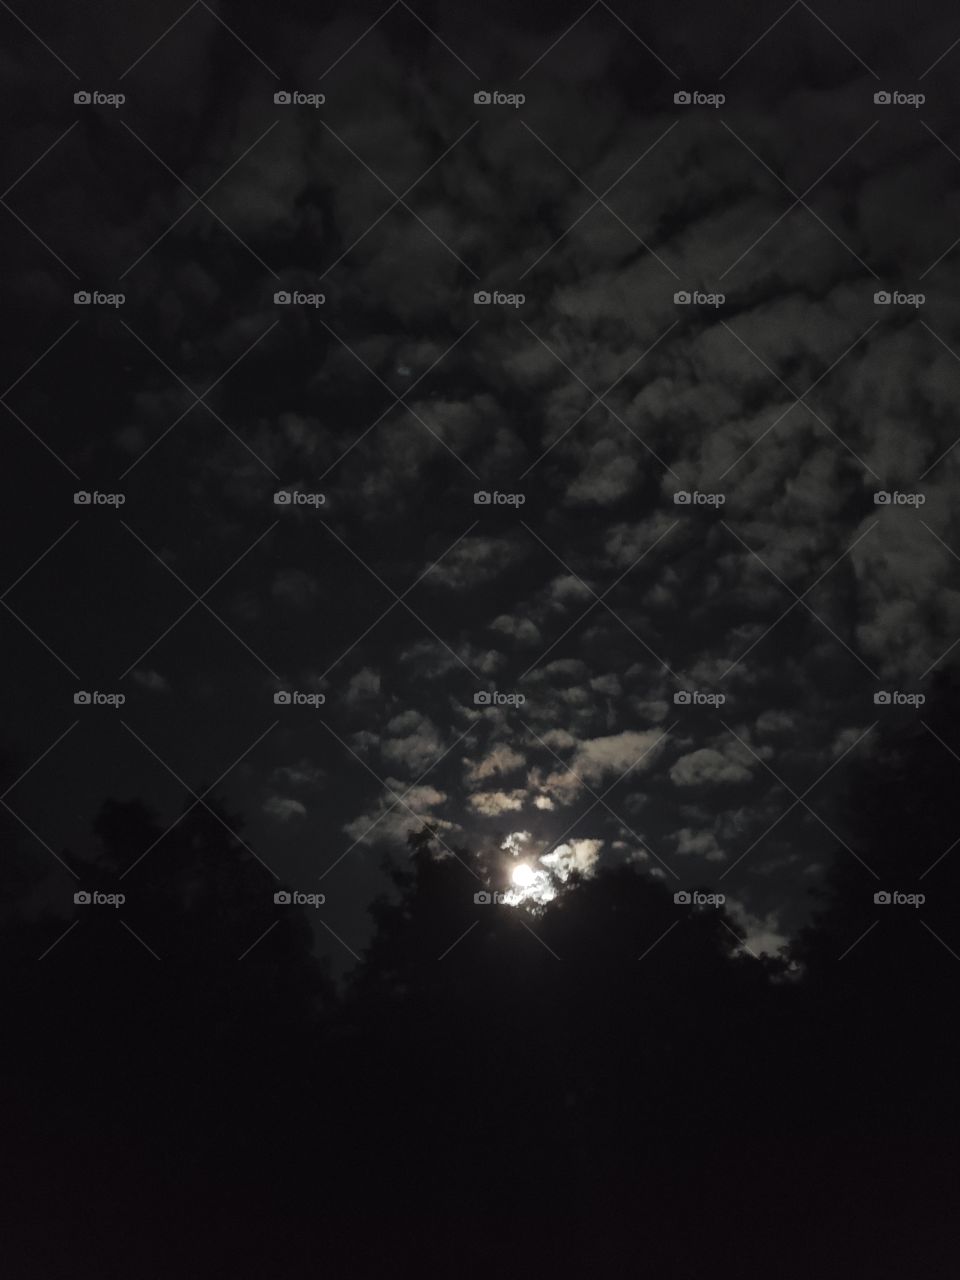 full moon with clouds and tree Silhouettes at night